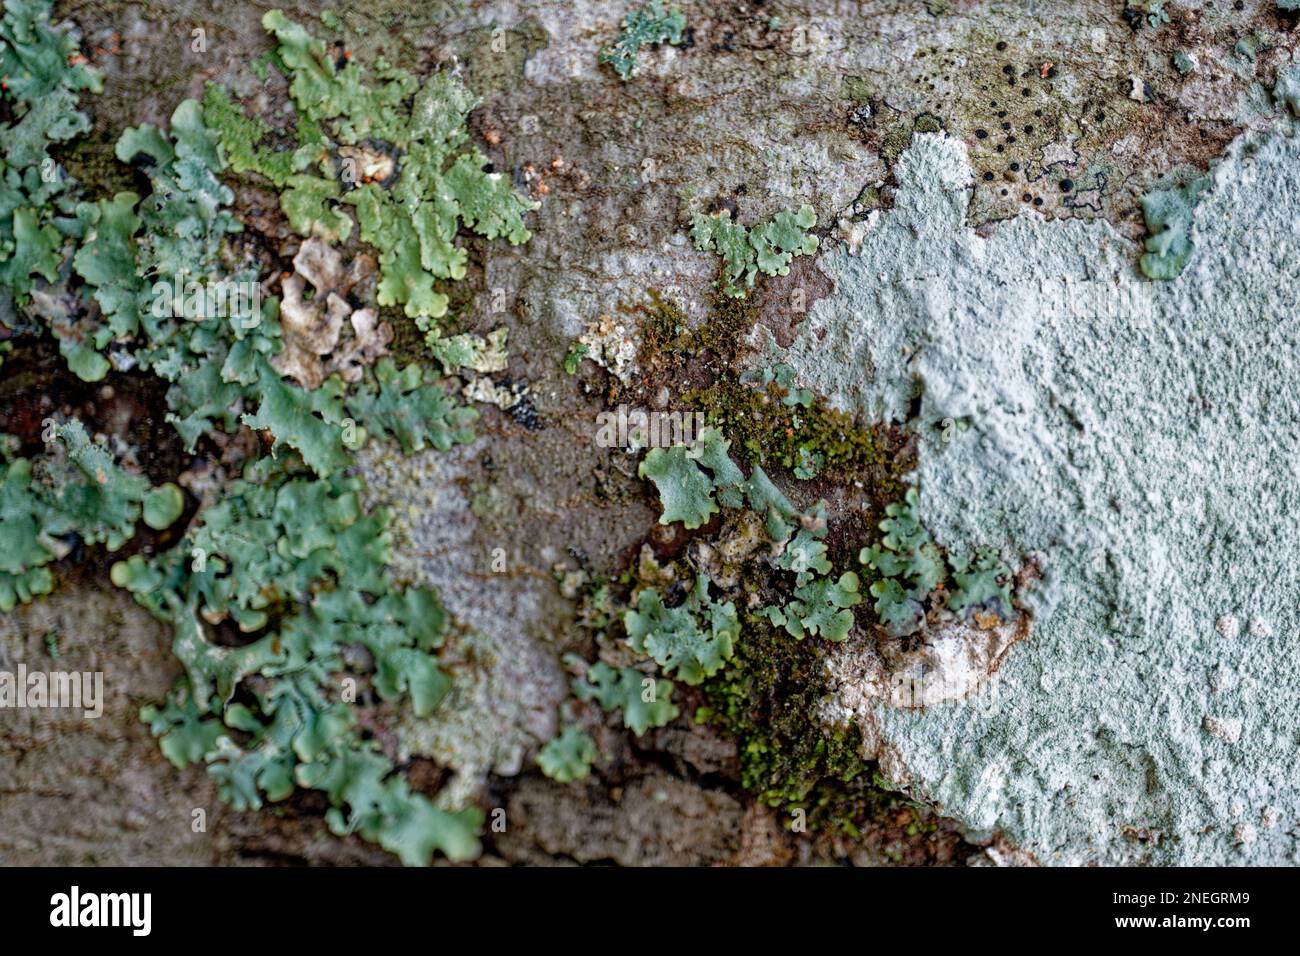 Closeup view selective focus of variety of lichens and mosses on a tree with the bark showing through backgrounds and textures Stock Photo